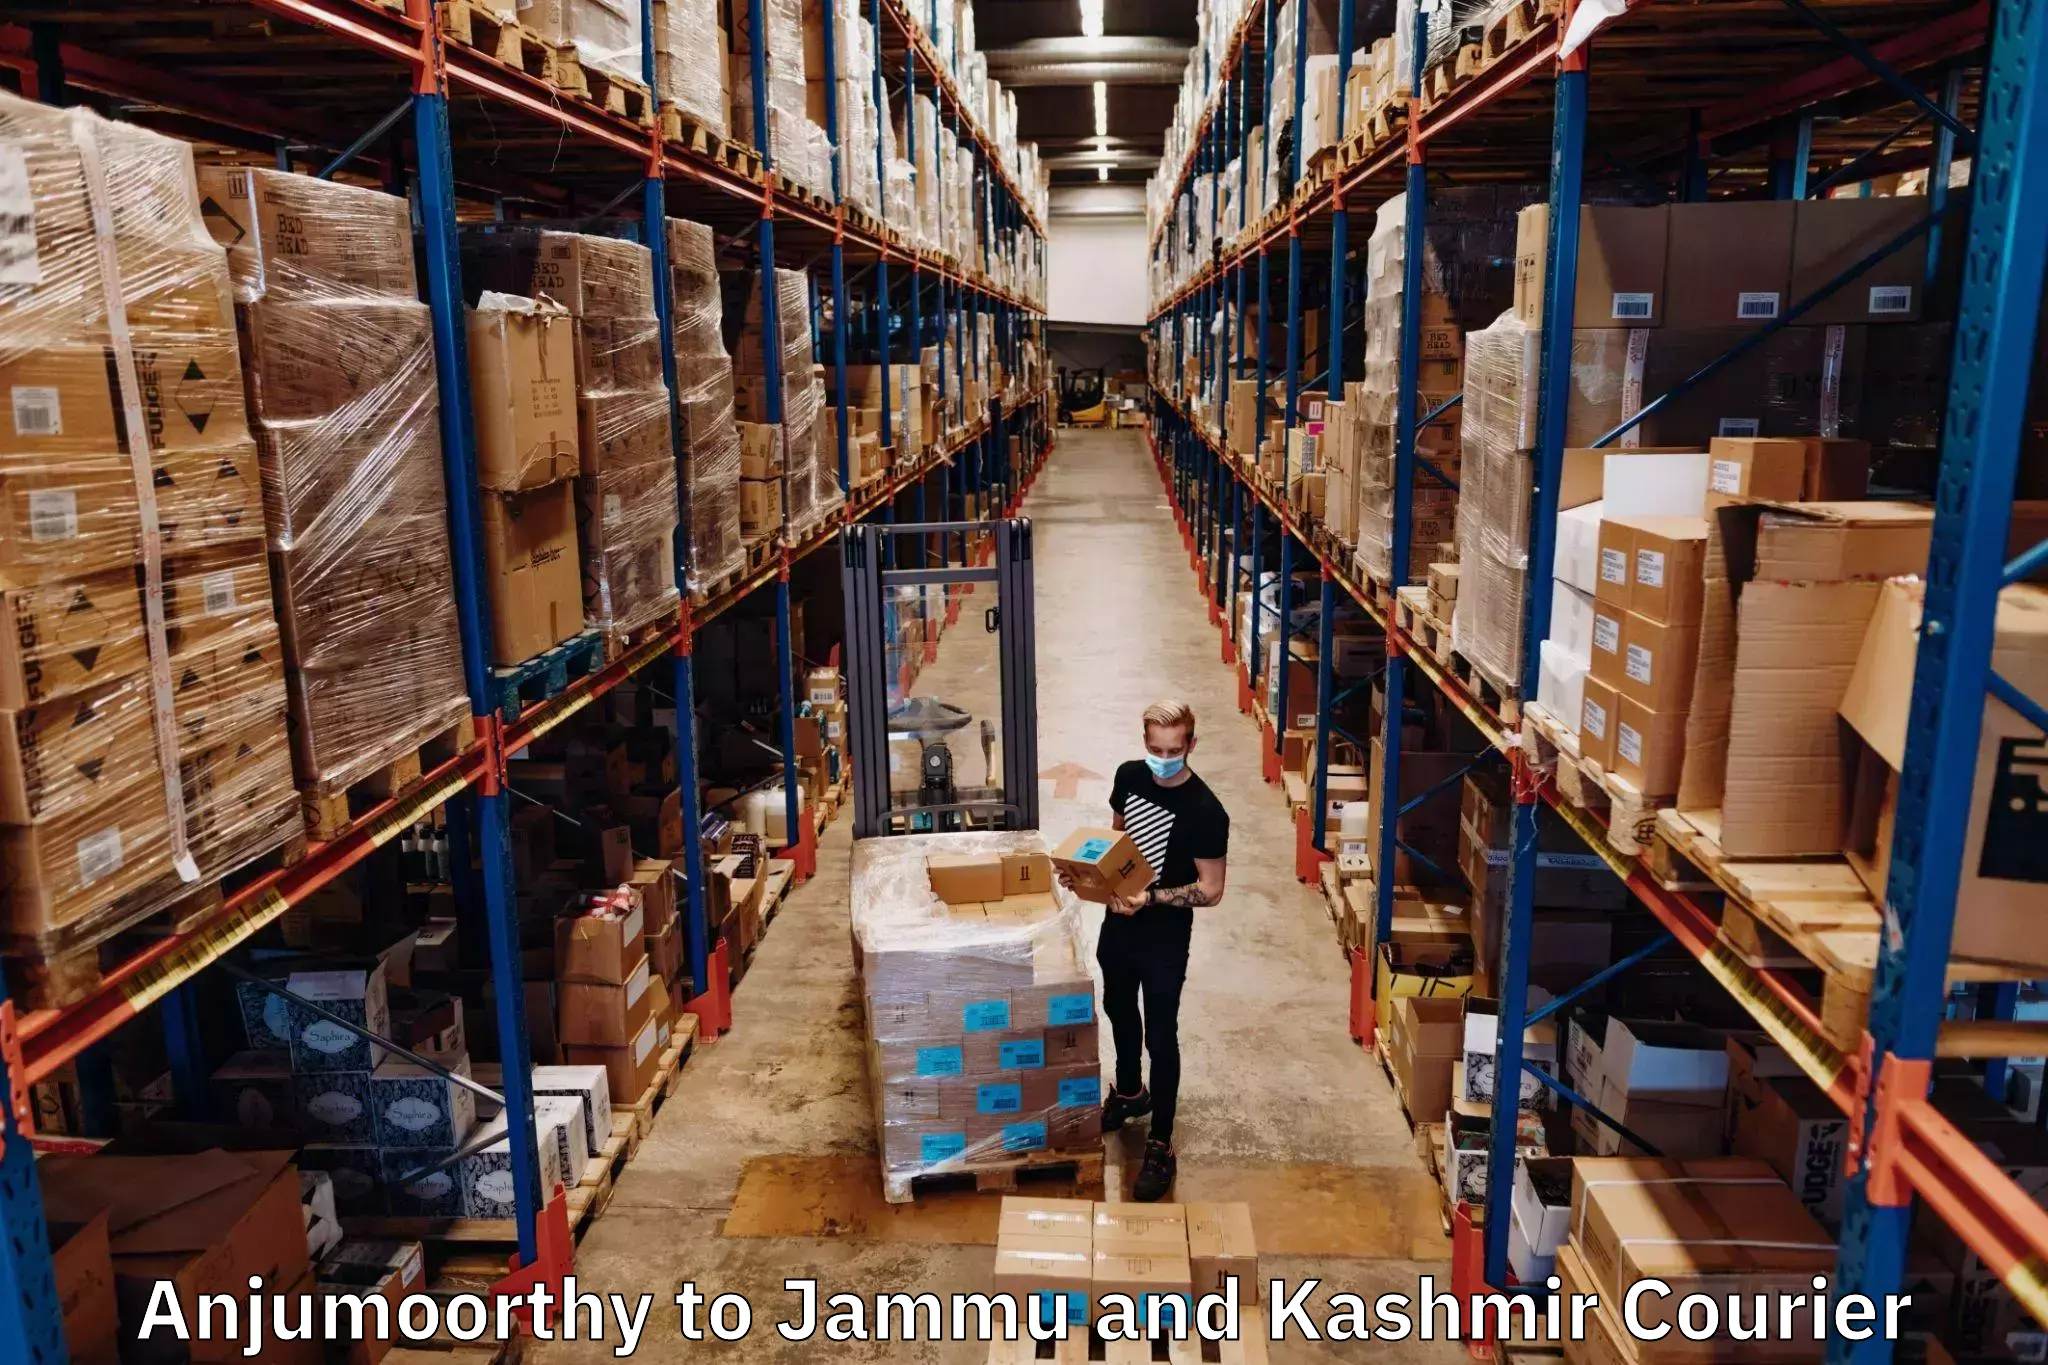 Multi-national courier services Anjumoorthy to Jammu